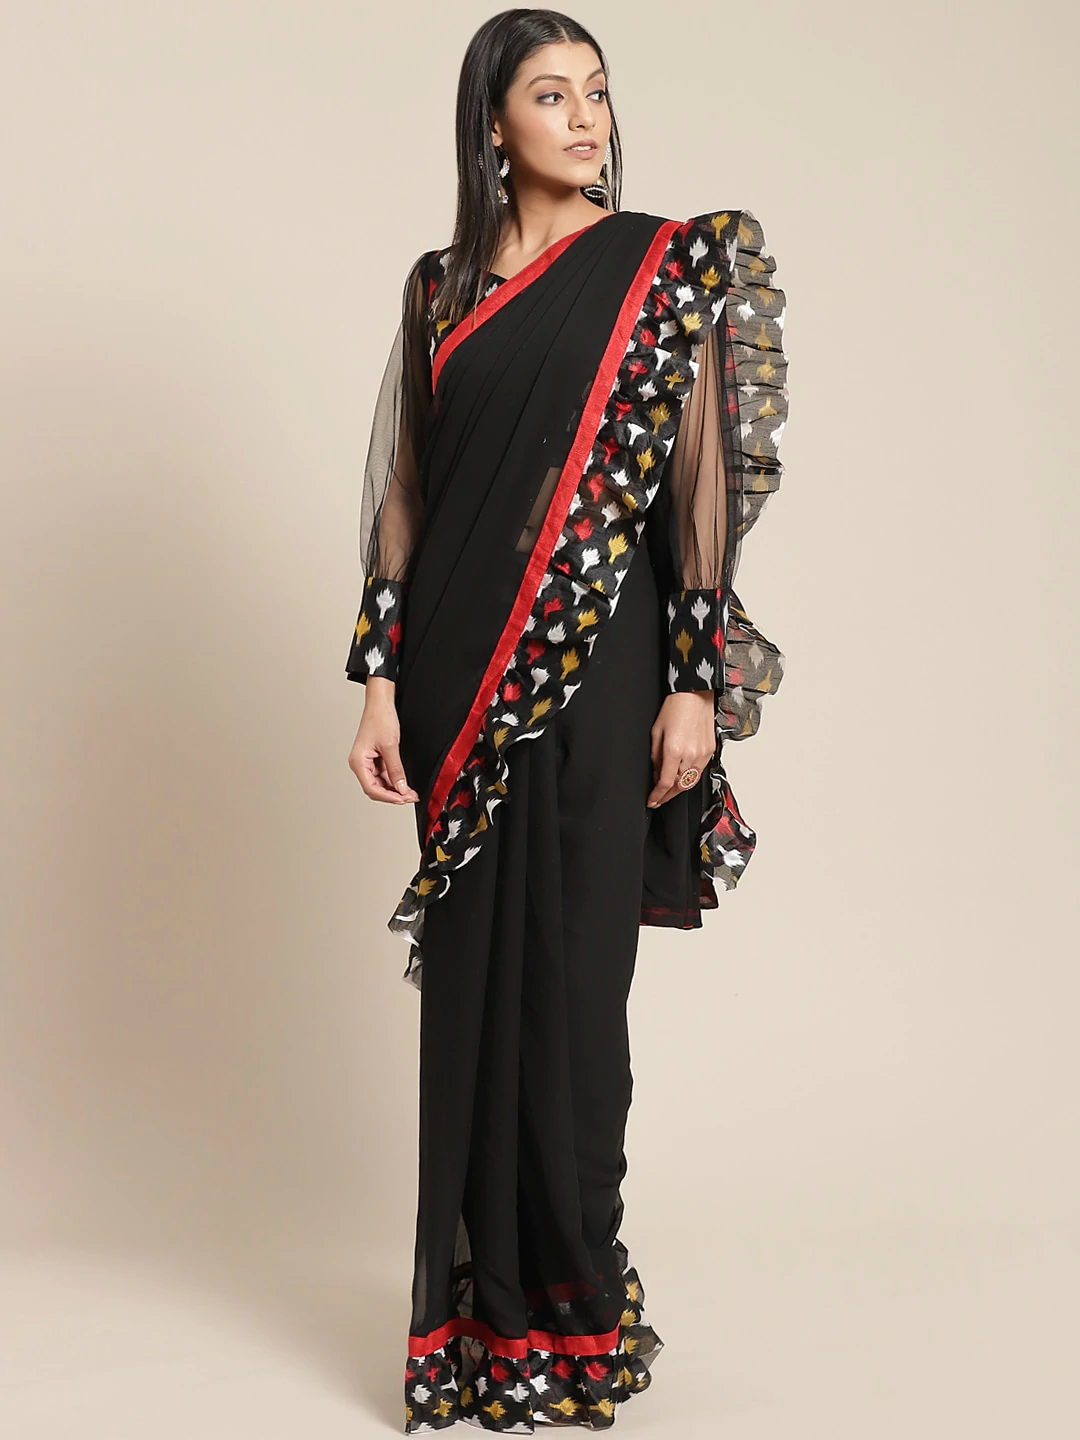 Fusion Black Georgette Ruffed Saree With Bold Ikat inspired Prints